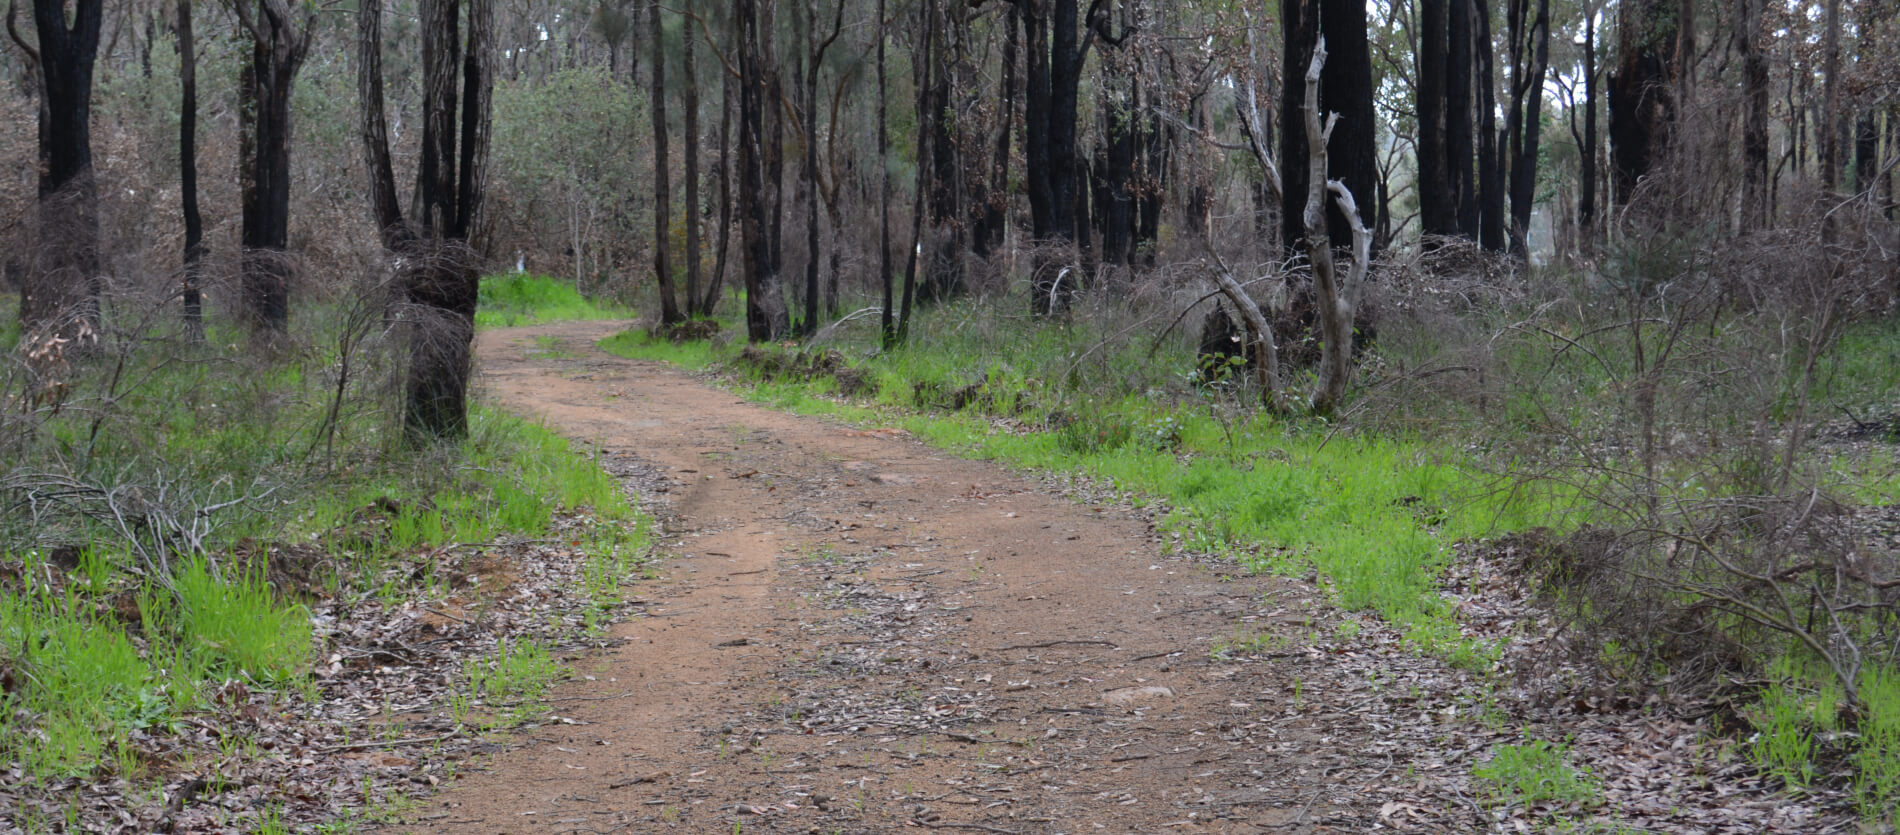 View of one of the access areas within the bushland located at the rear of Alan Anderson Park